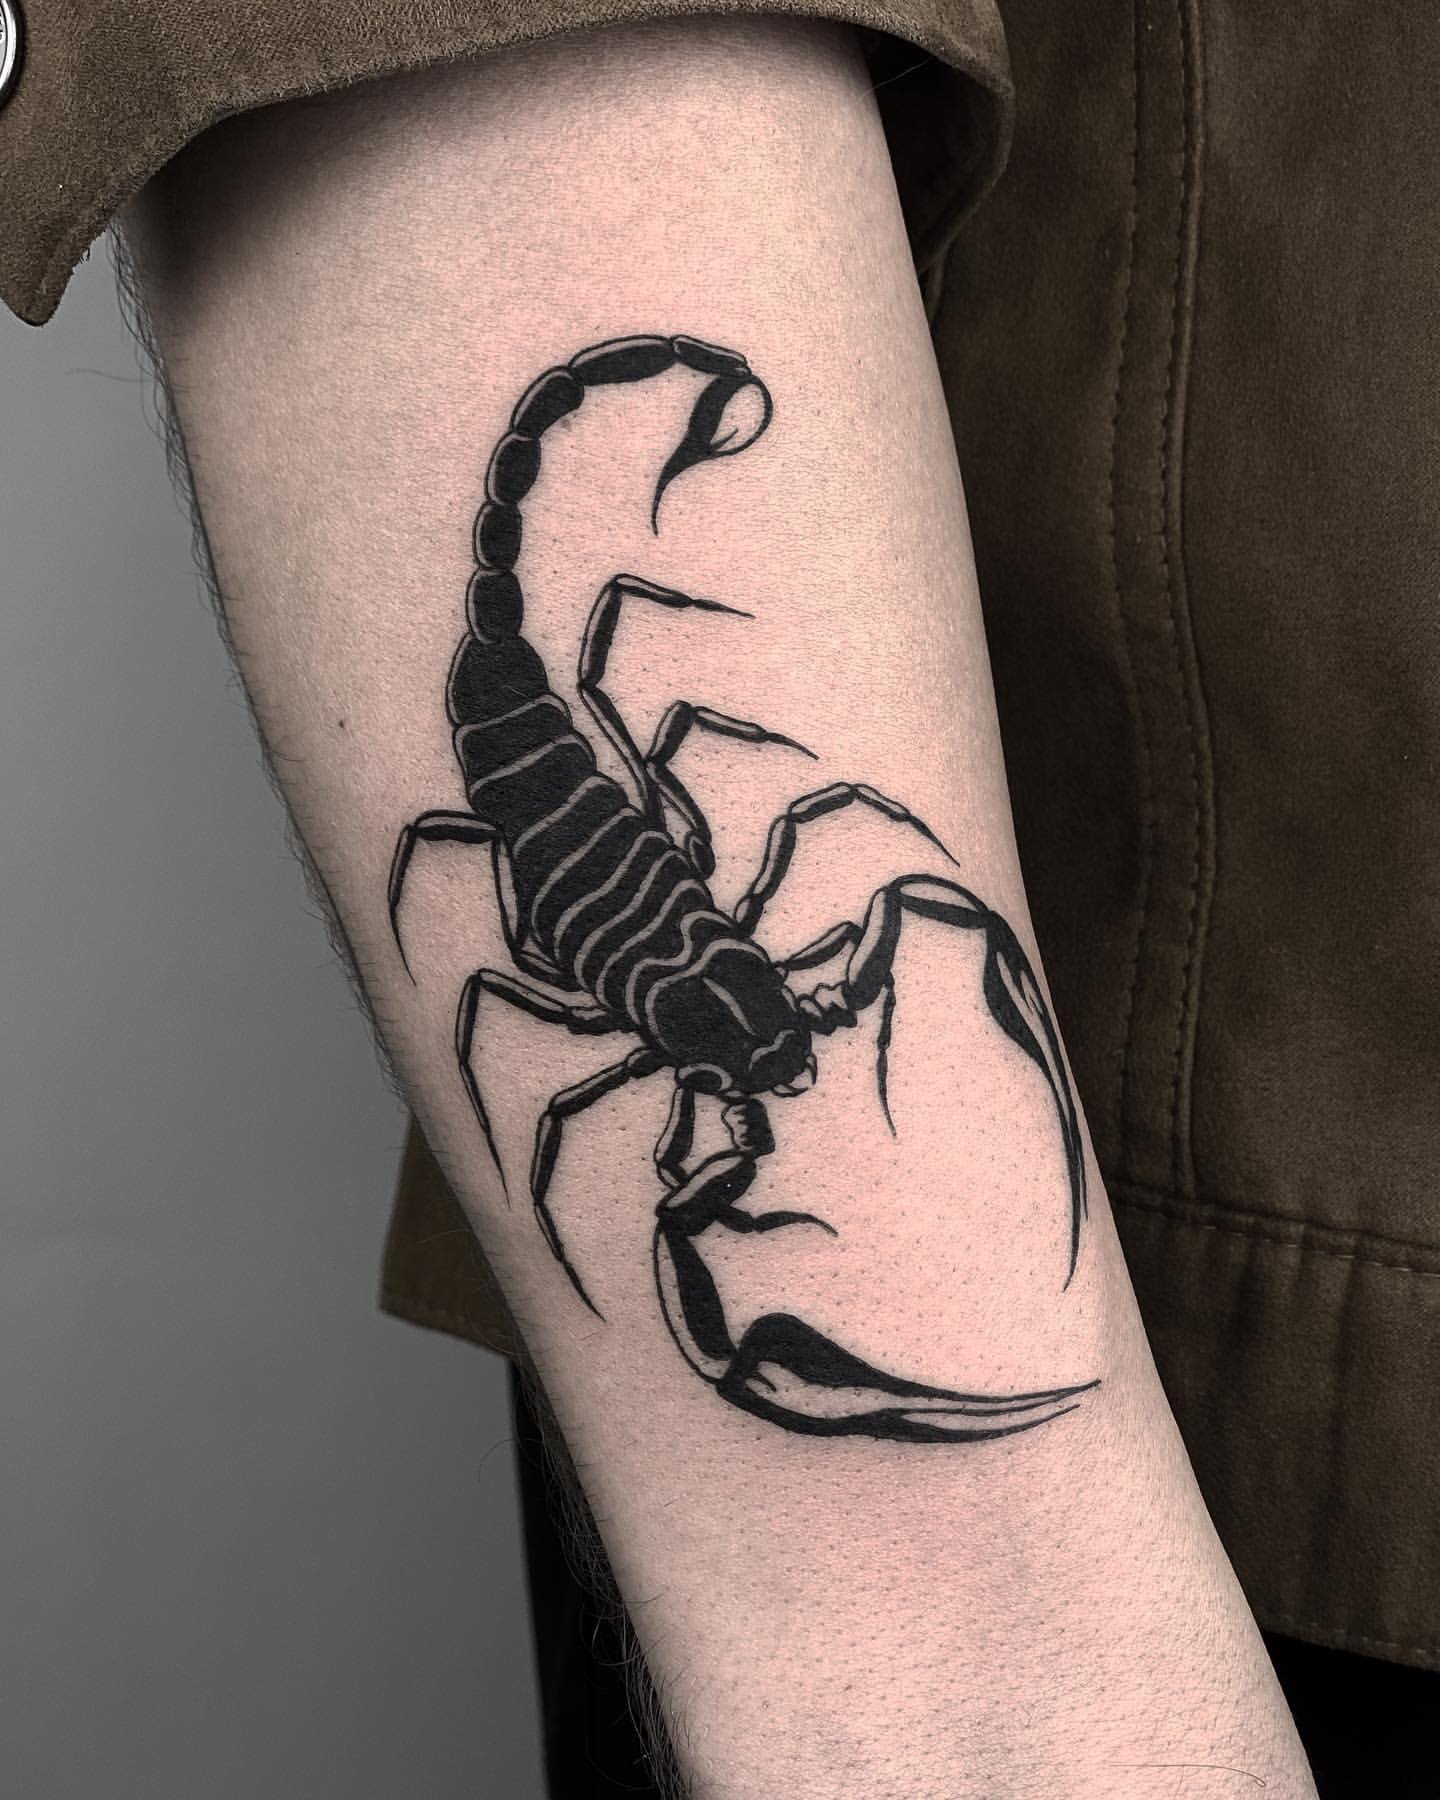 Waterproof Tattoo Sticker,1 Sheet Scorpion Print Temporary Tattoos For Men,Animal  Tattoo Stickers Adults,Fake Tattoos That Look Real,For Men,Women and Girls  | SHEIN